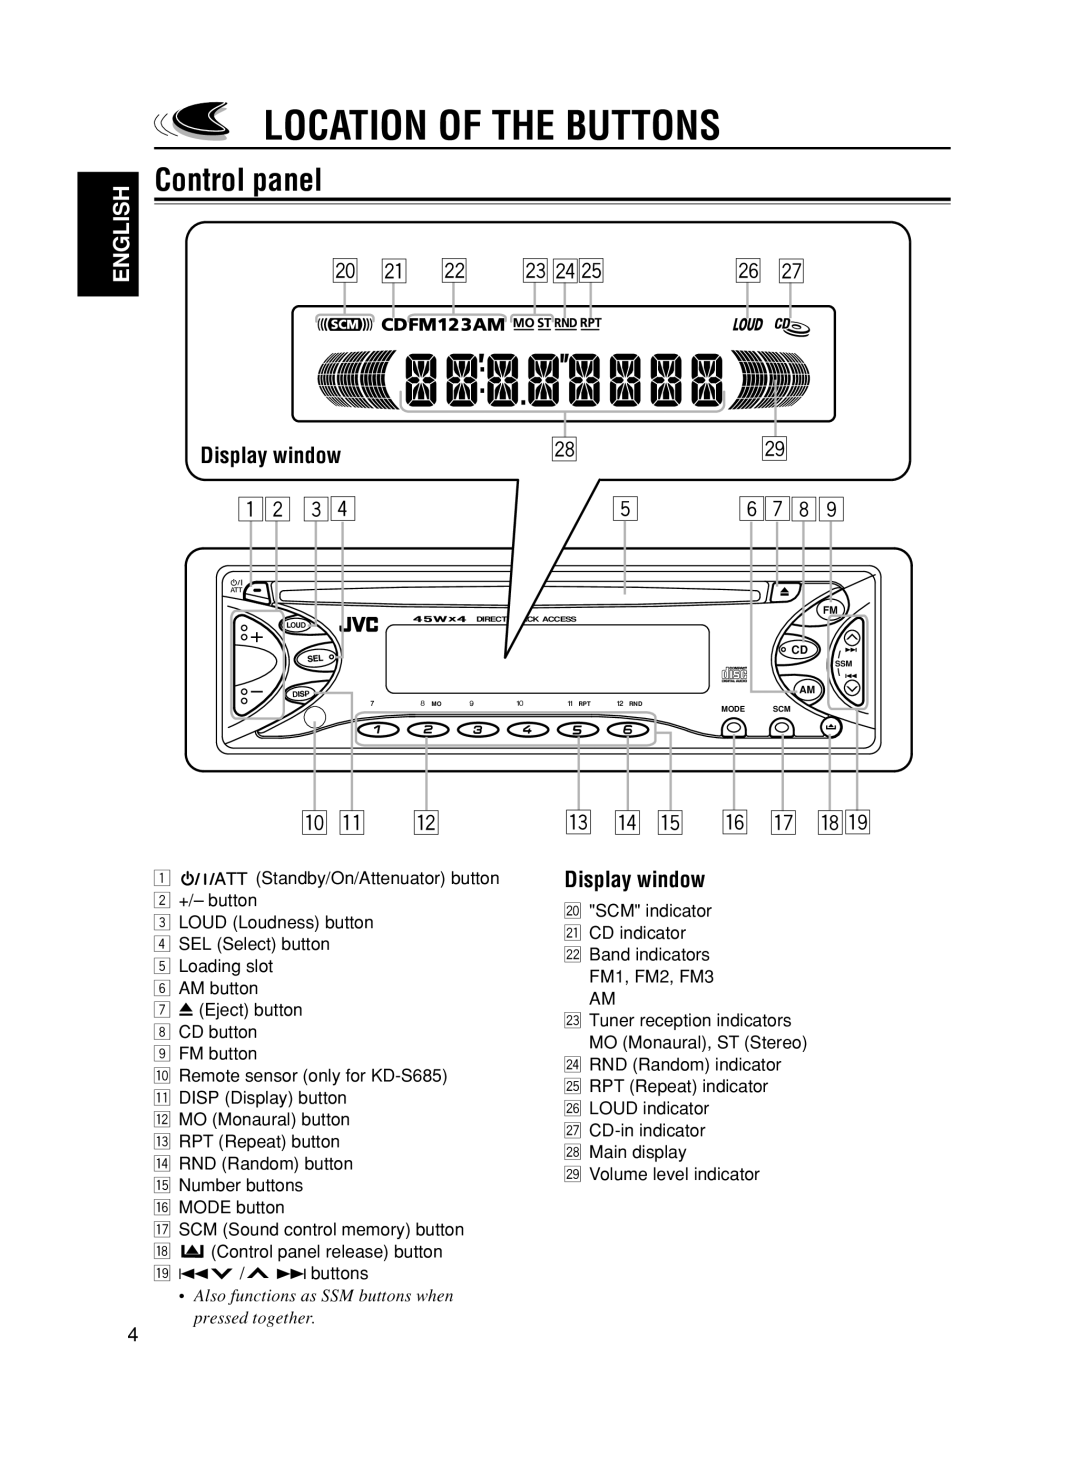 JVC KD-S685, GET0067-001A Location Of The Buttons, Control panel, a s dfg, 6789, e r t, y u io, Display window, English 